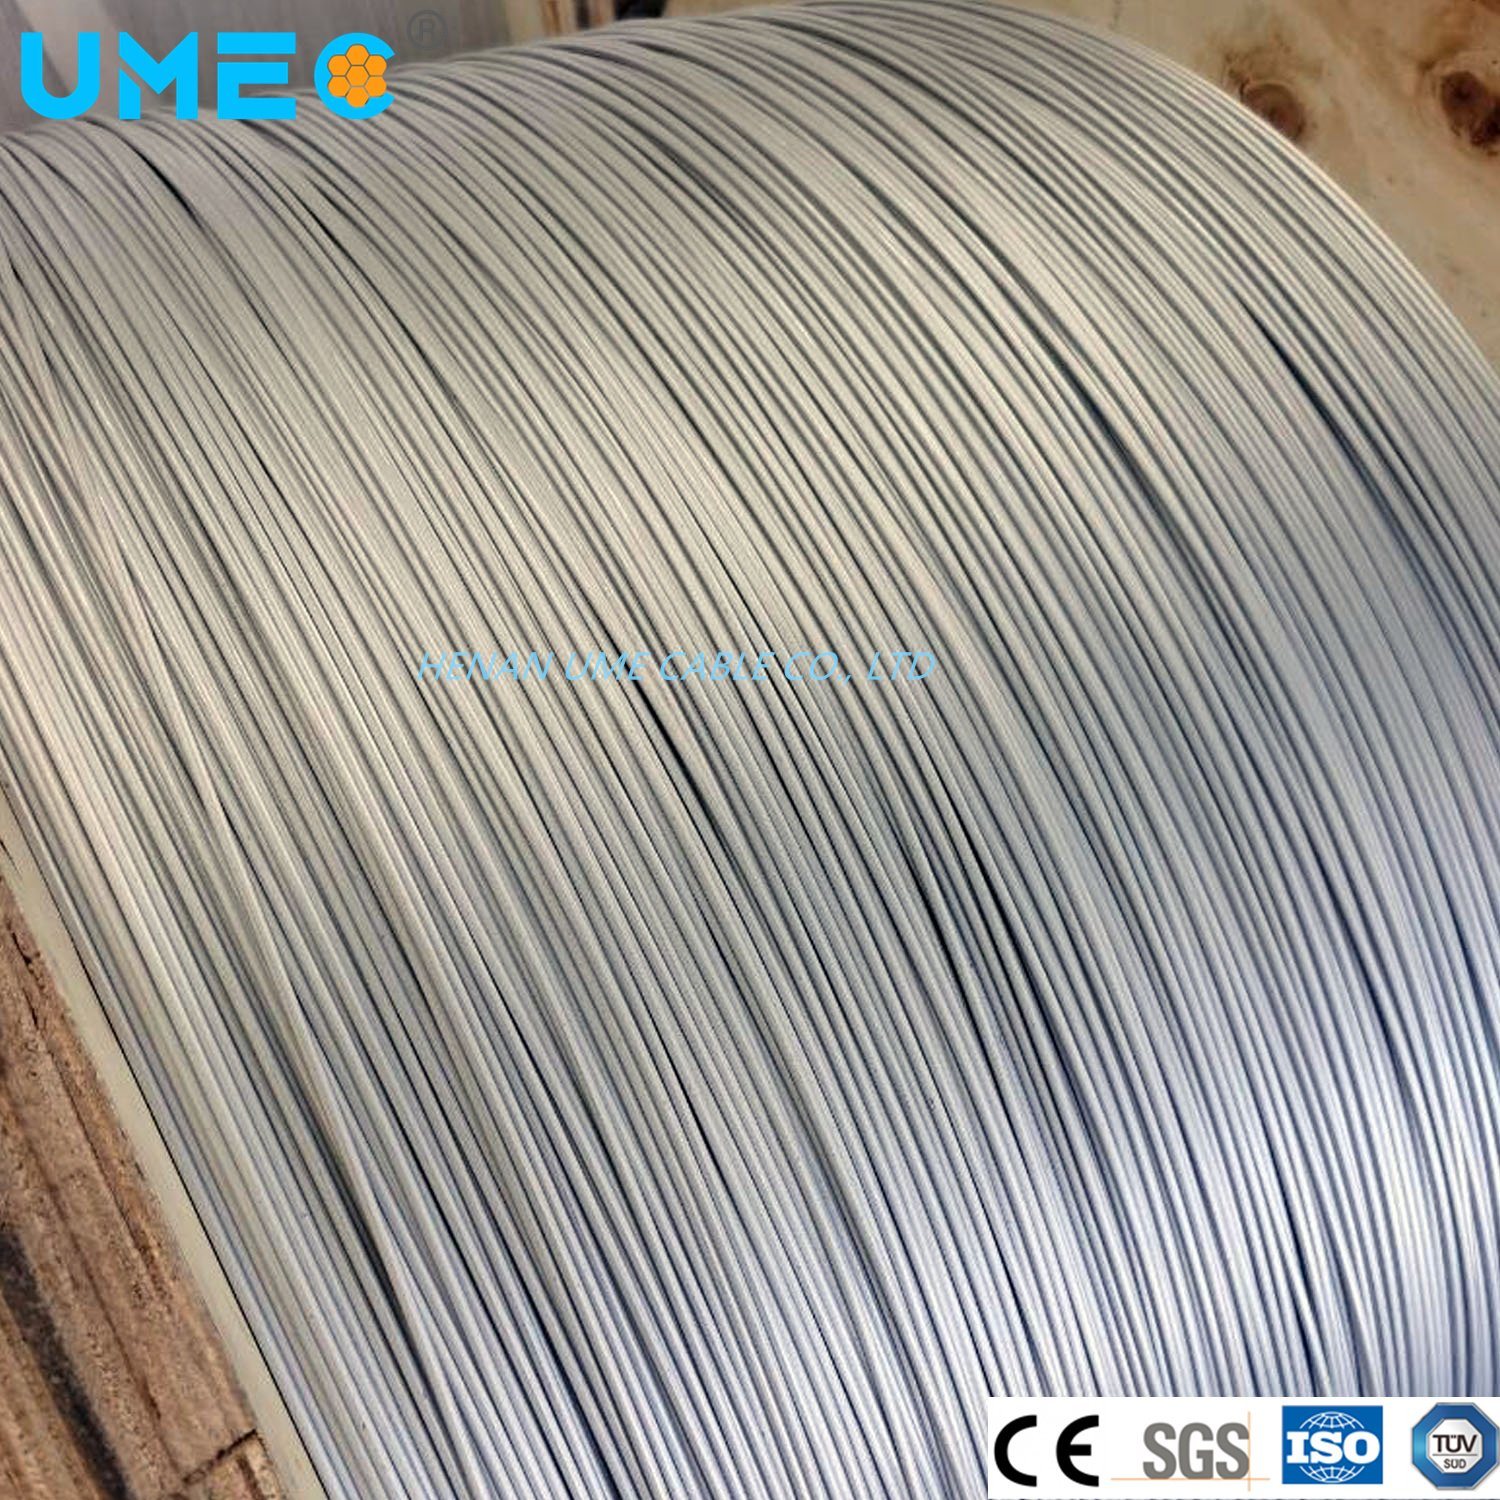 Alumoweld 1X19 Stainless Steel Cable 1/8", 3/16", and 1/10′′ Acs Stranded Wire